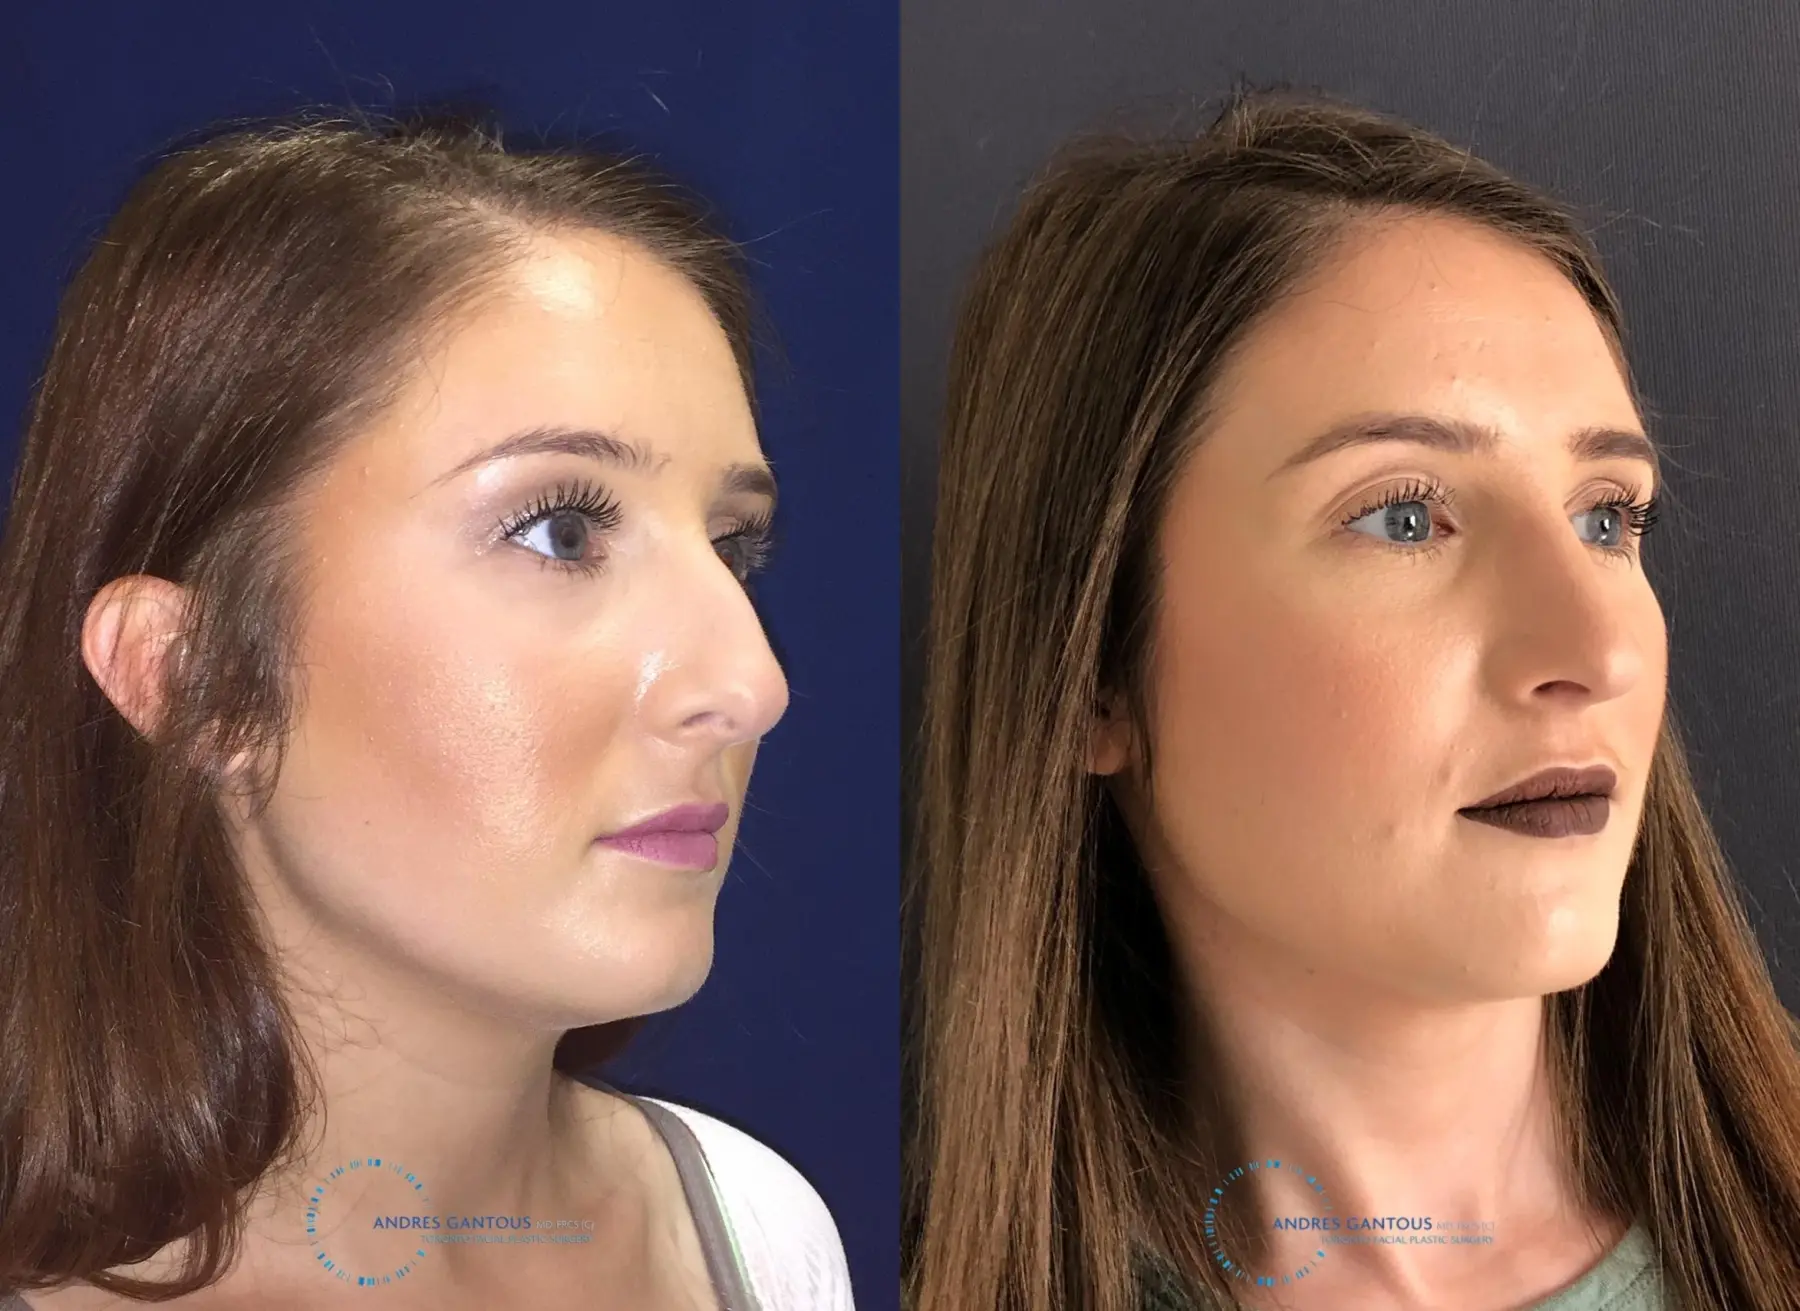 Rhinoplasty: Patient 1 - Before and After 4